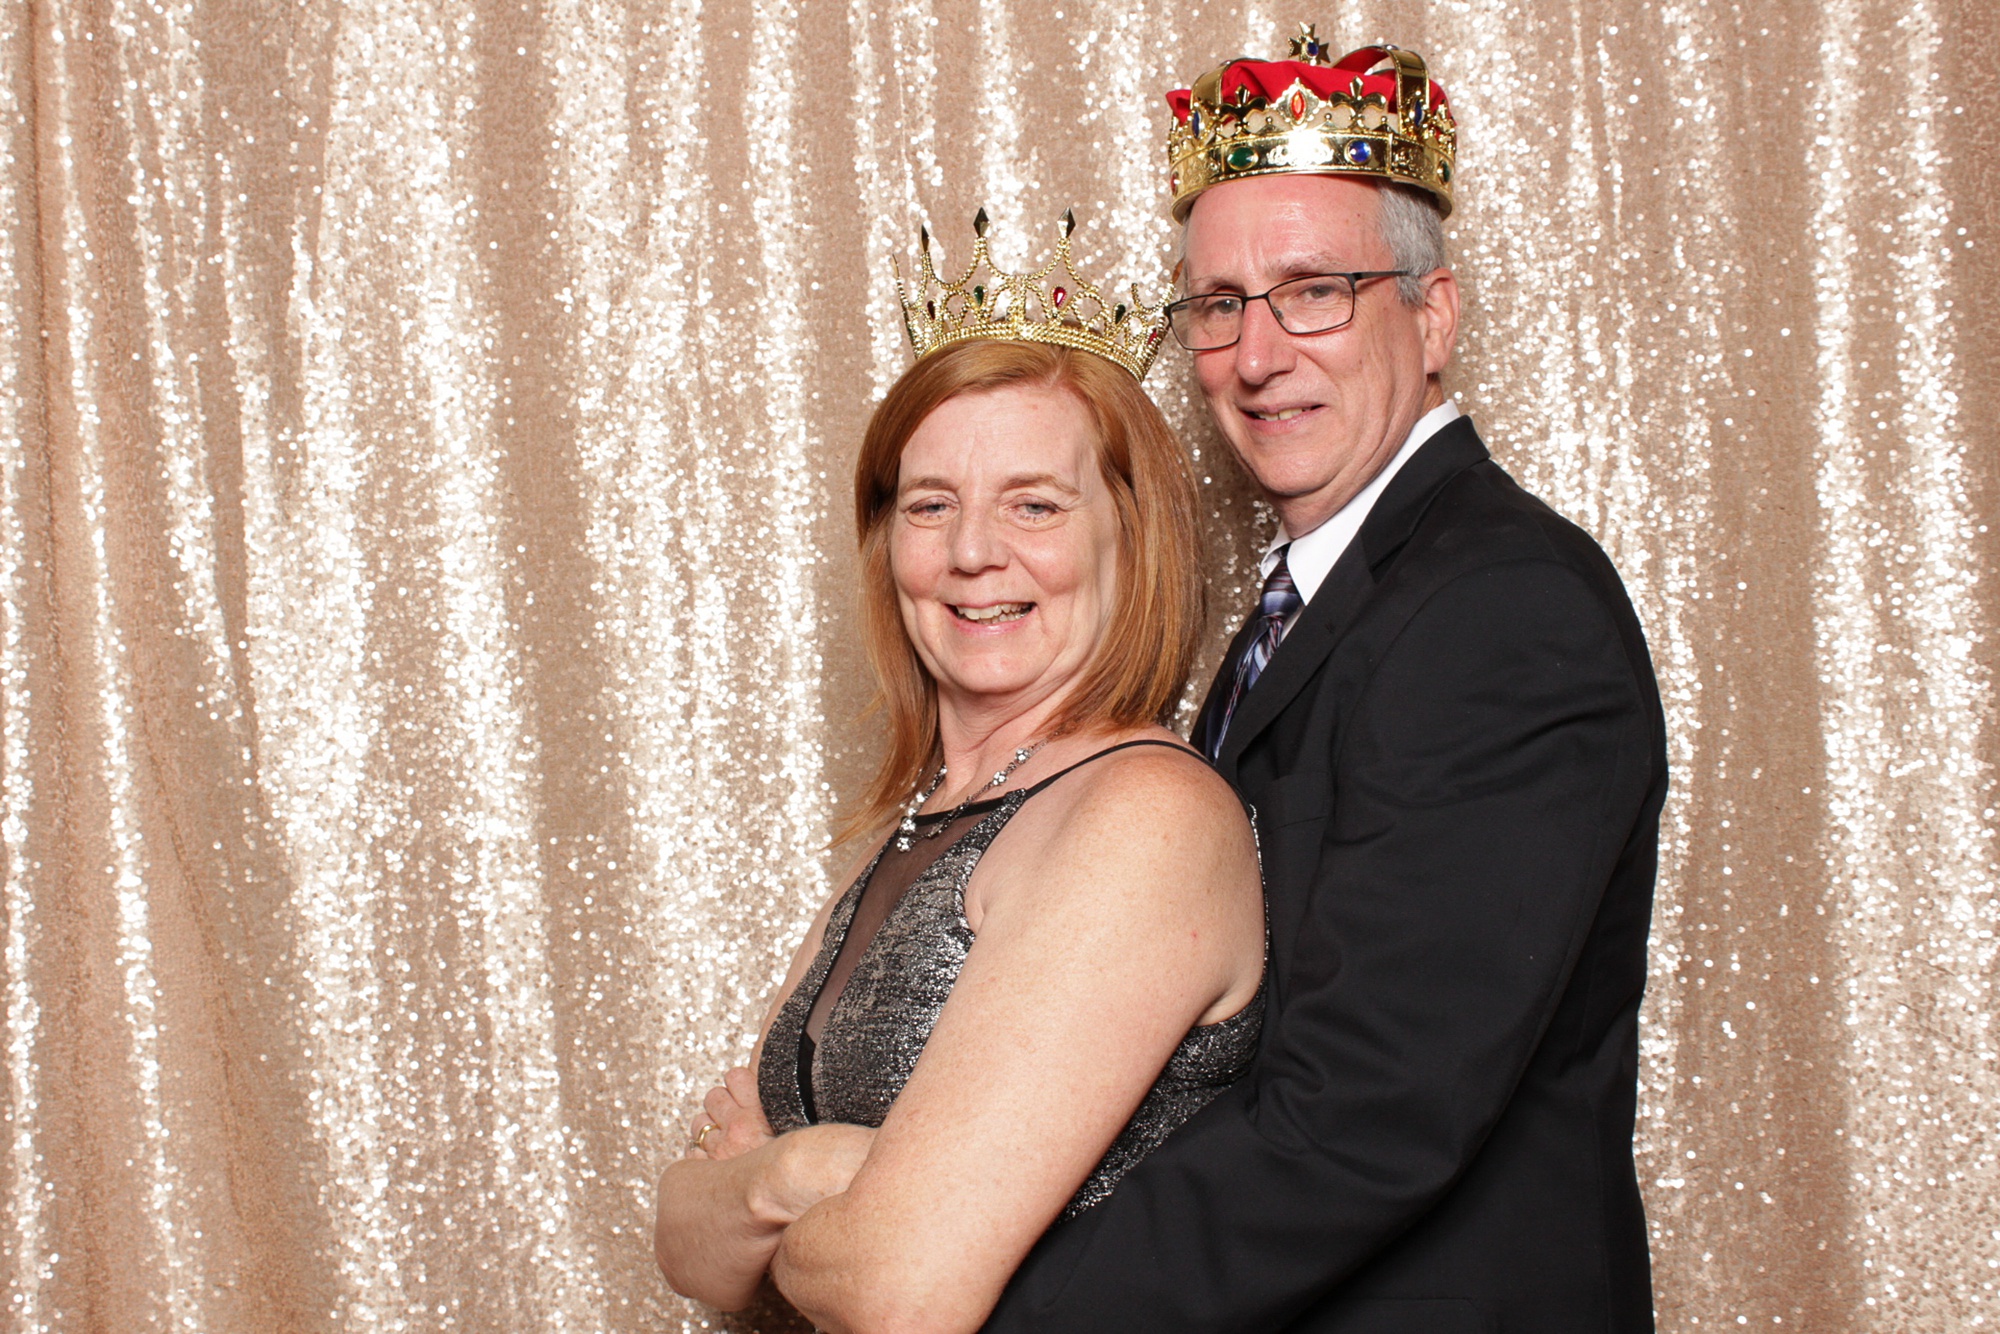 guest pose in photo booth with crowns